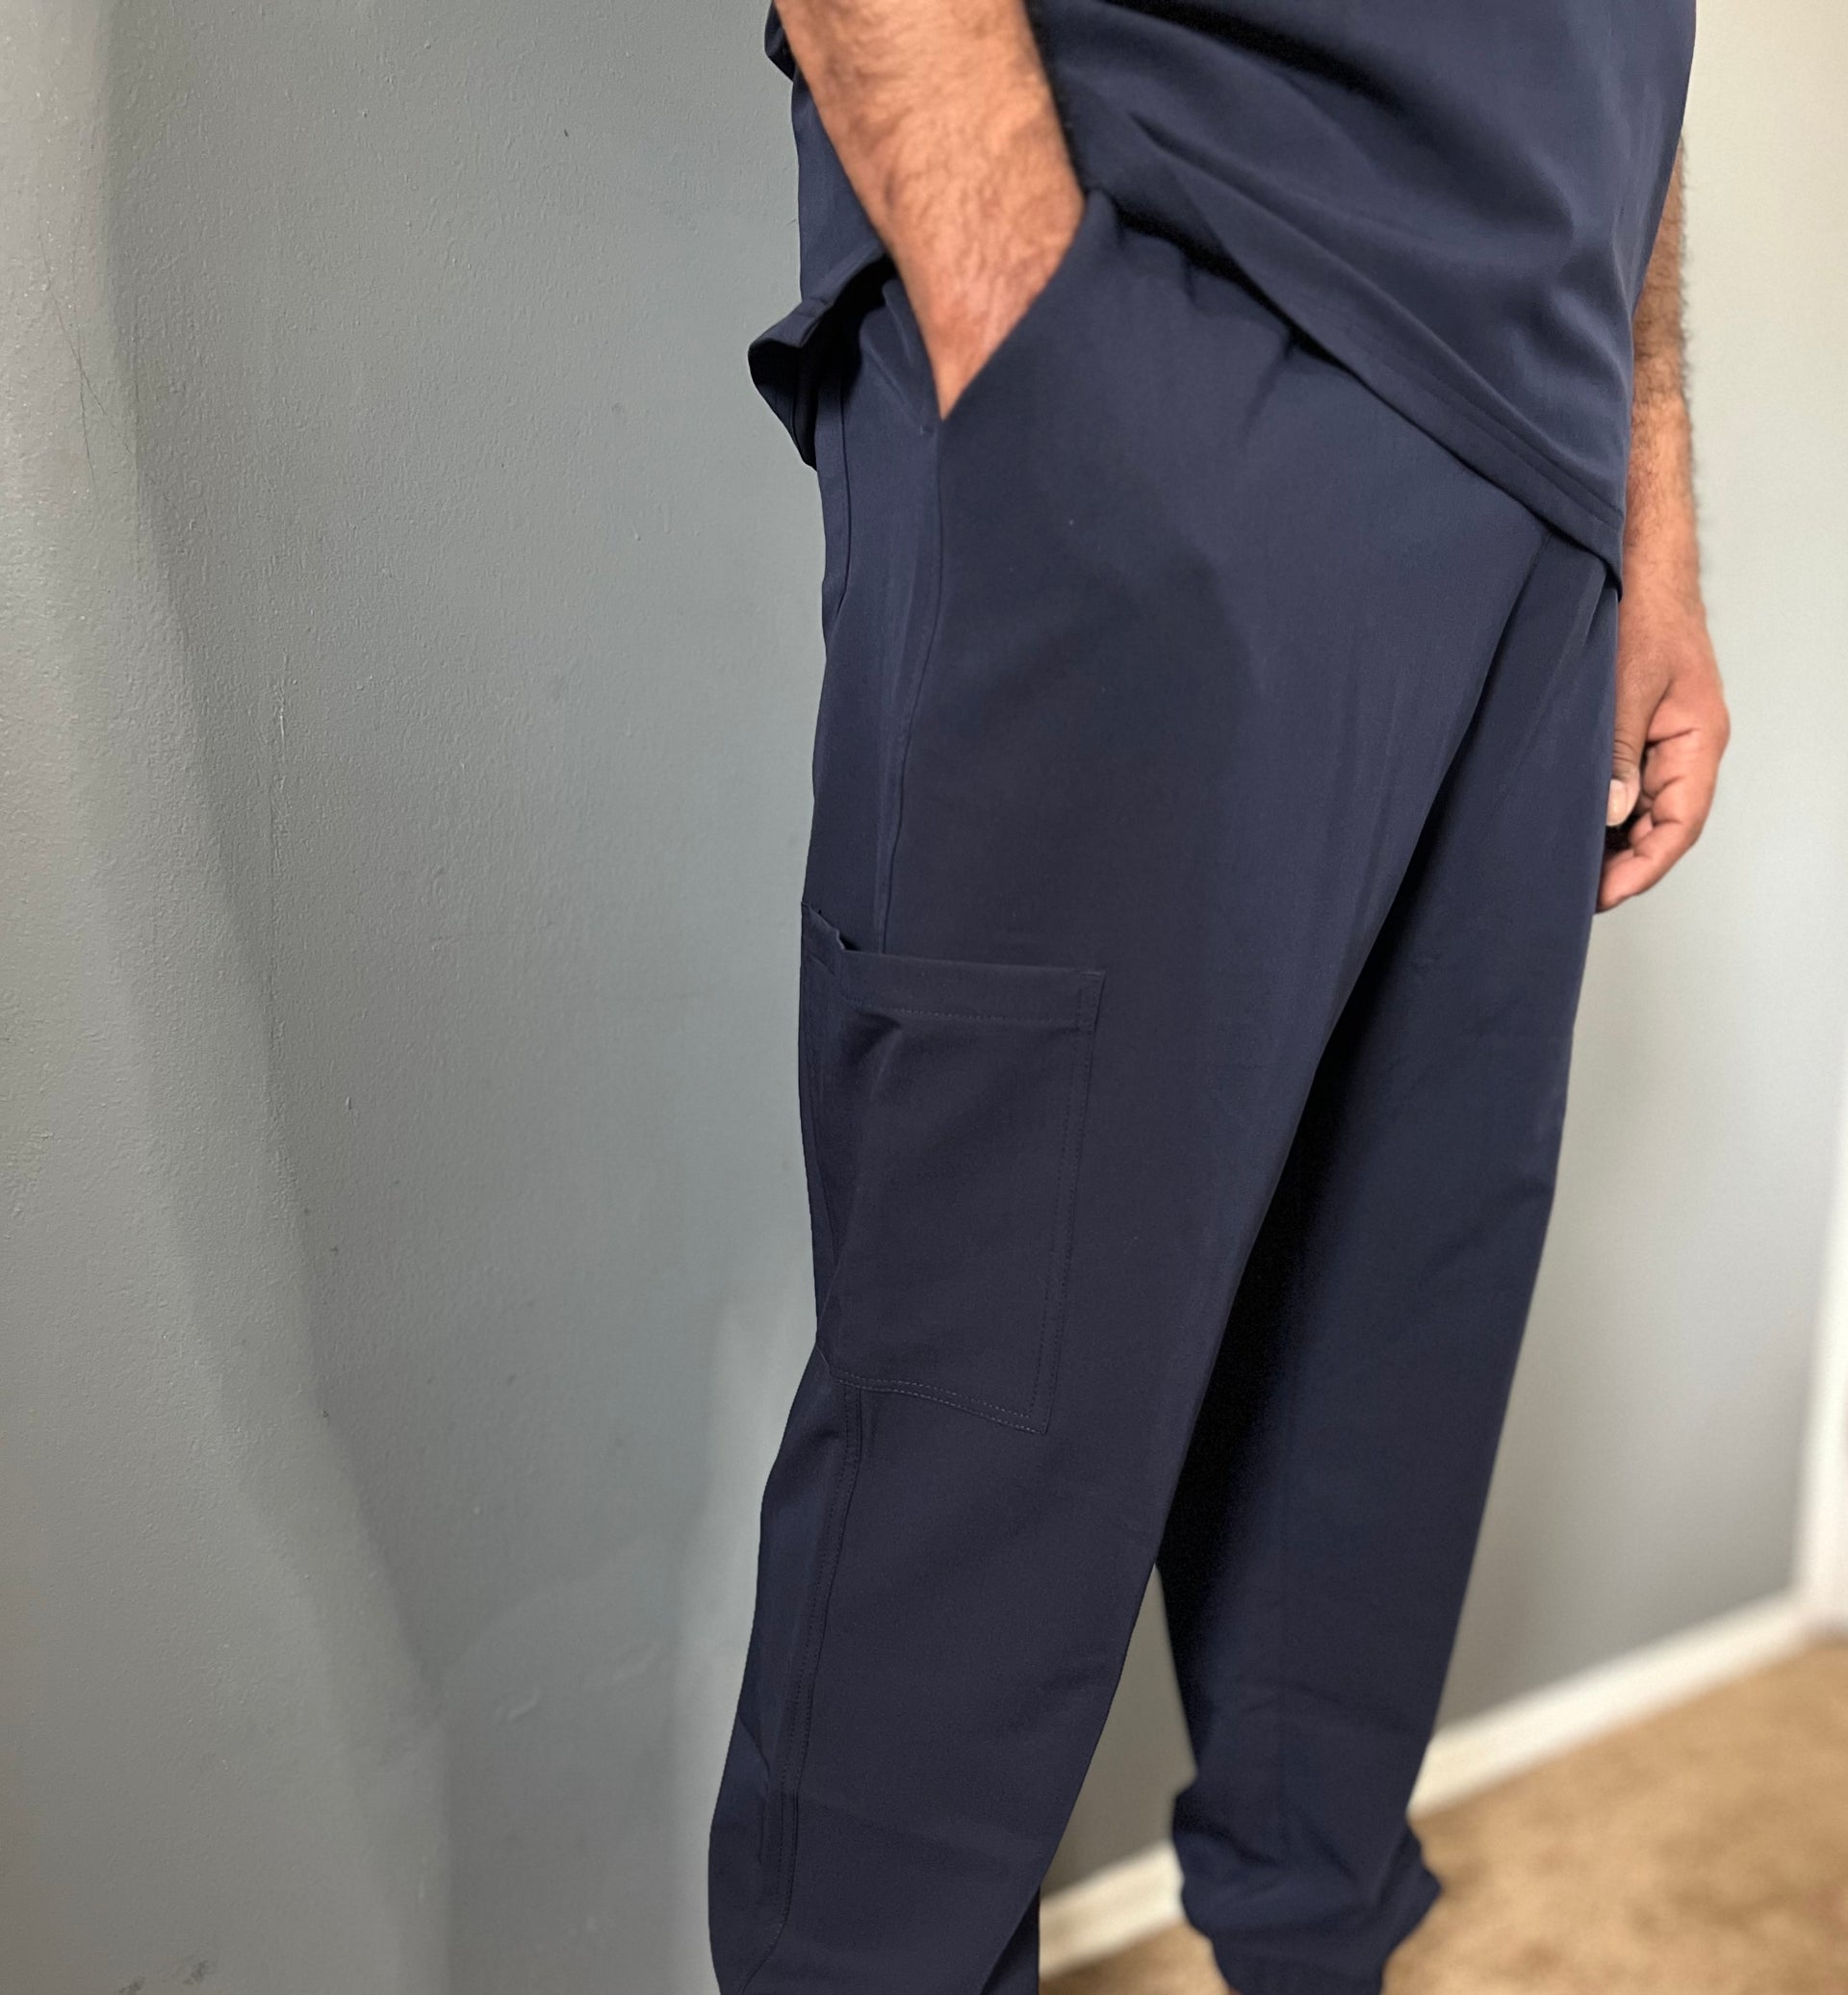 Anon Men's Scrub Pants (Stealth Collection) Poly/Spandex - Midnight Blue